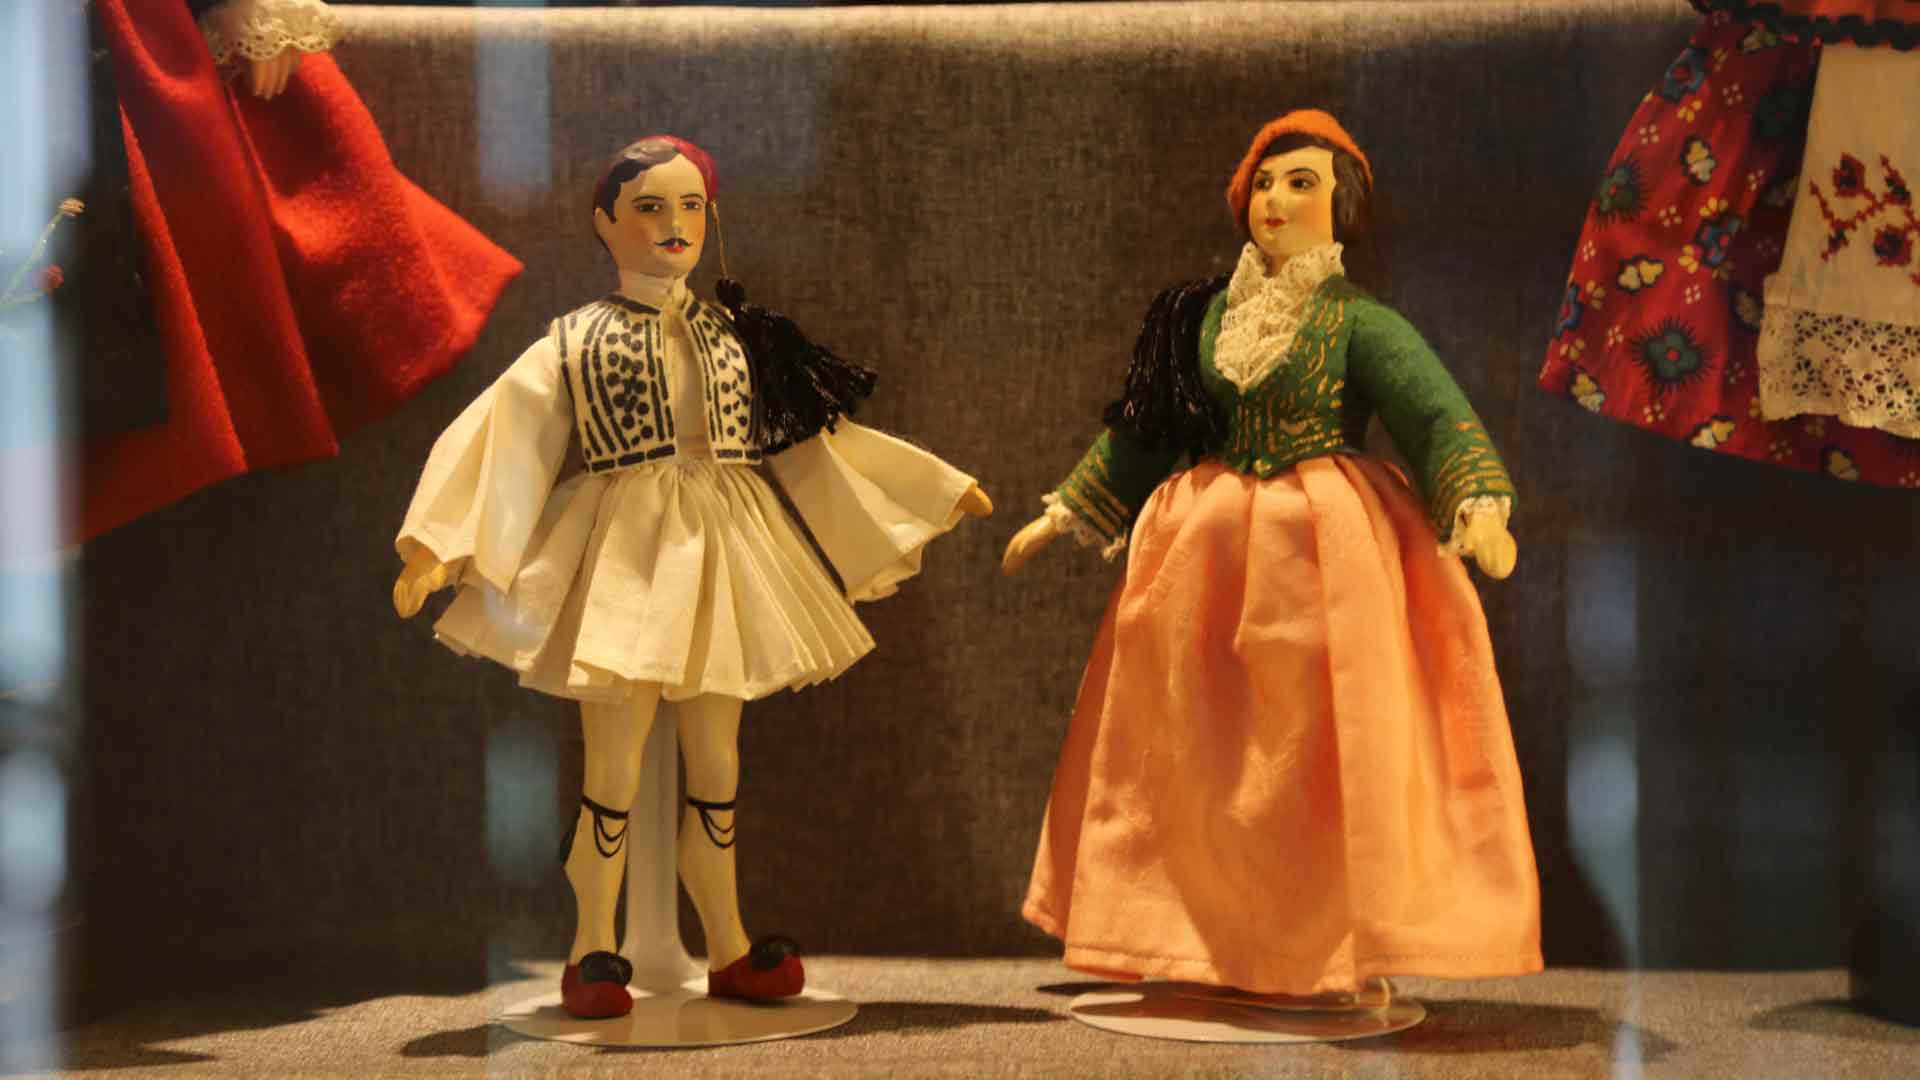 pair of dolls, a male wearing white, and a female doll wearing an orange dress